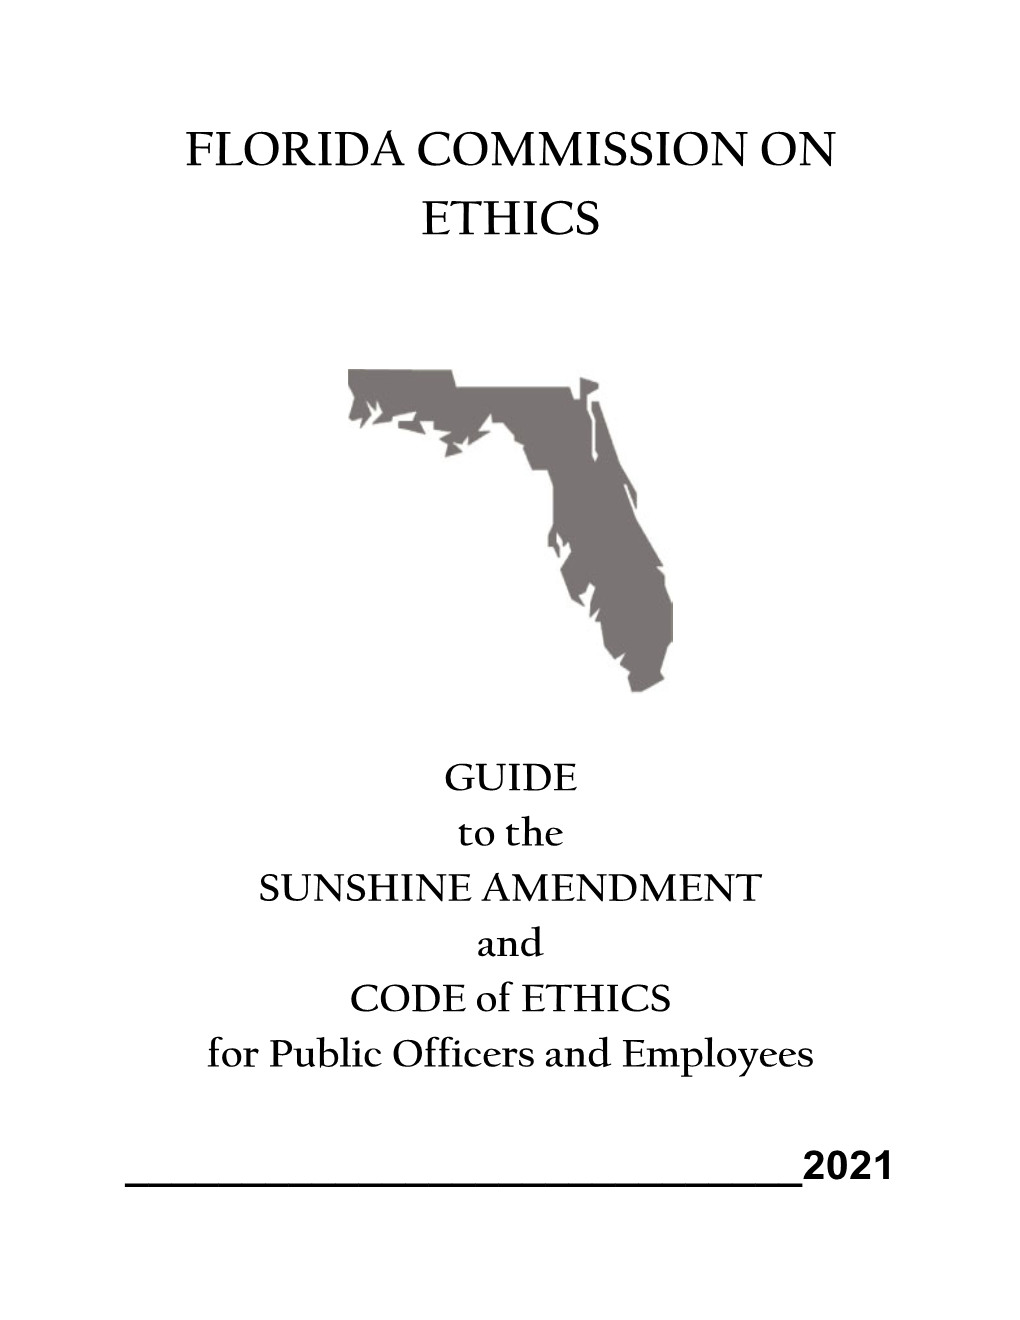 GUIDE to the SUNSHINE AMENDMENT and CODE of ETHICS for Public Officers and Employees